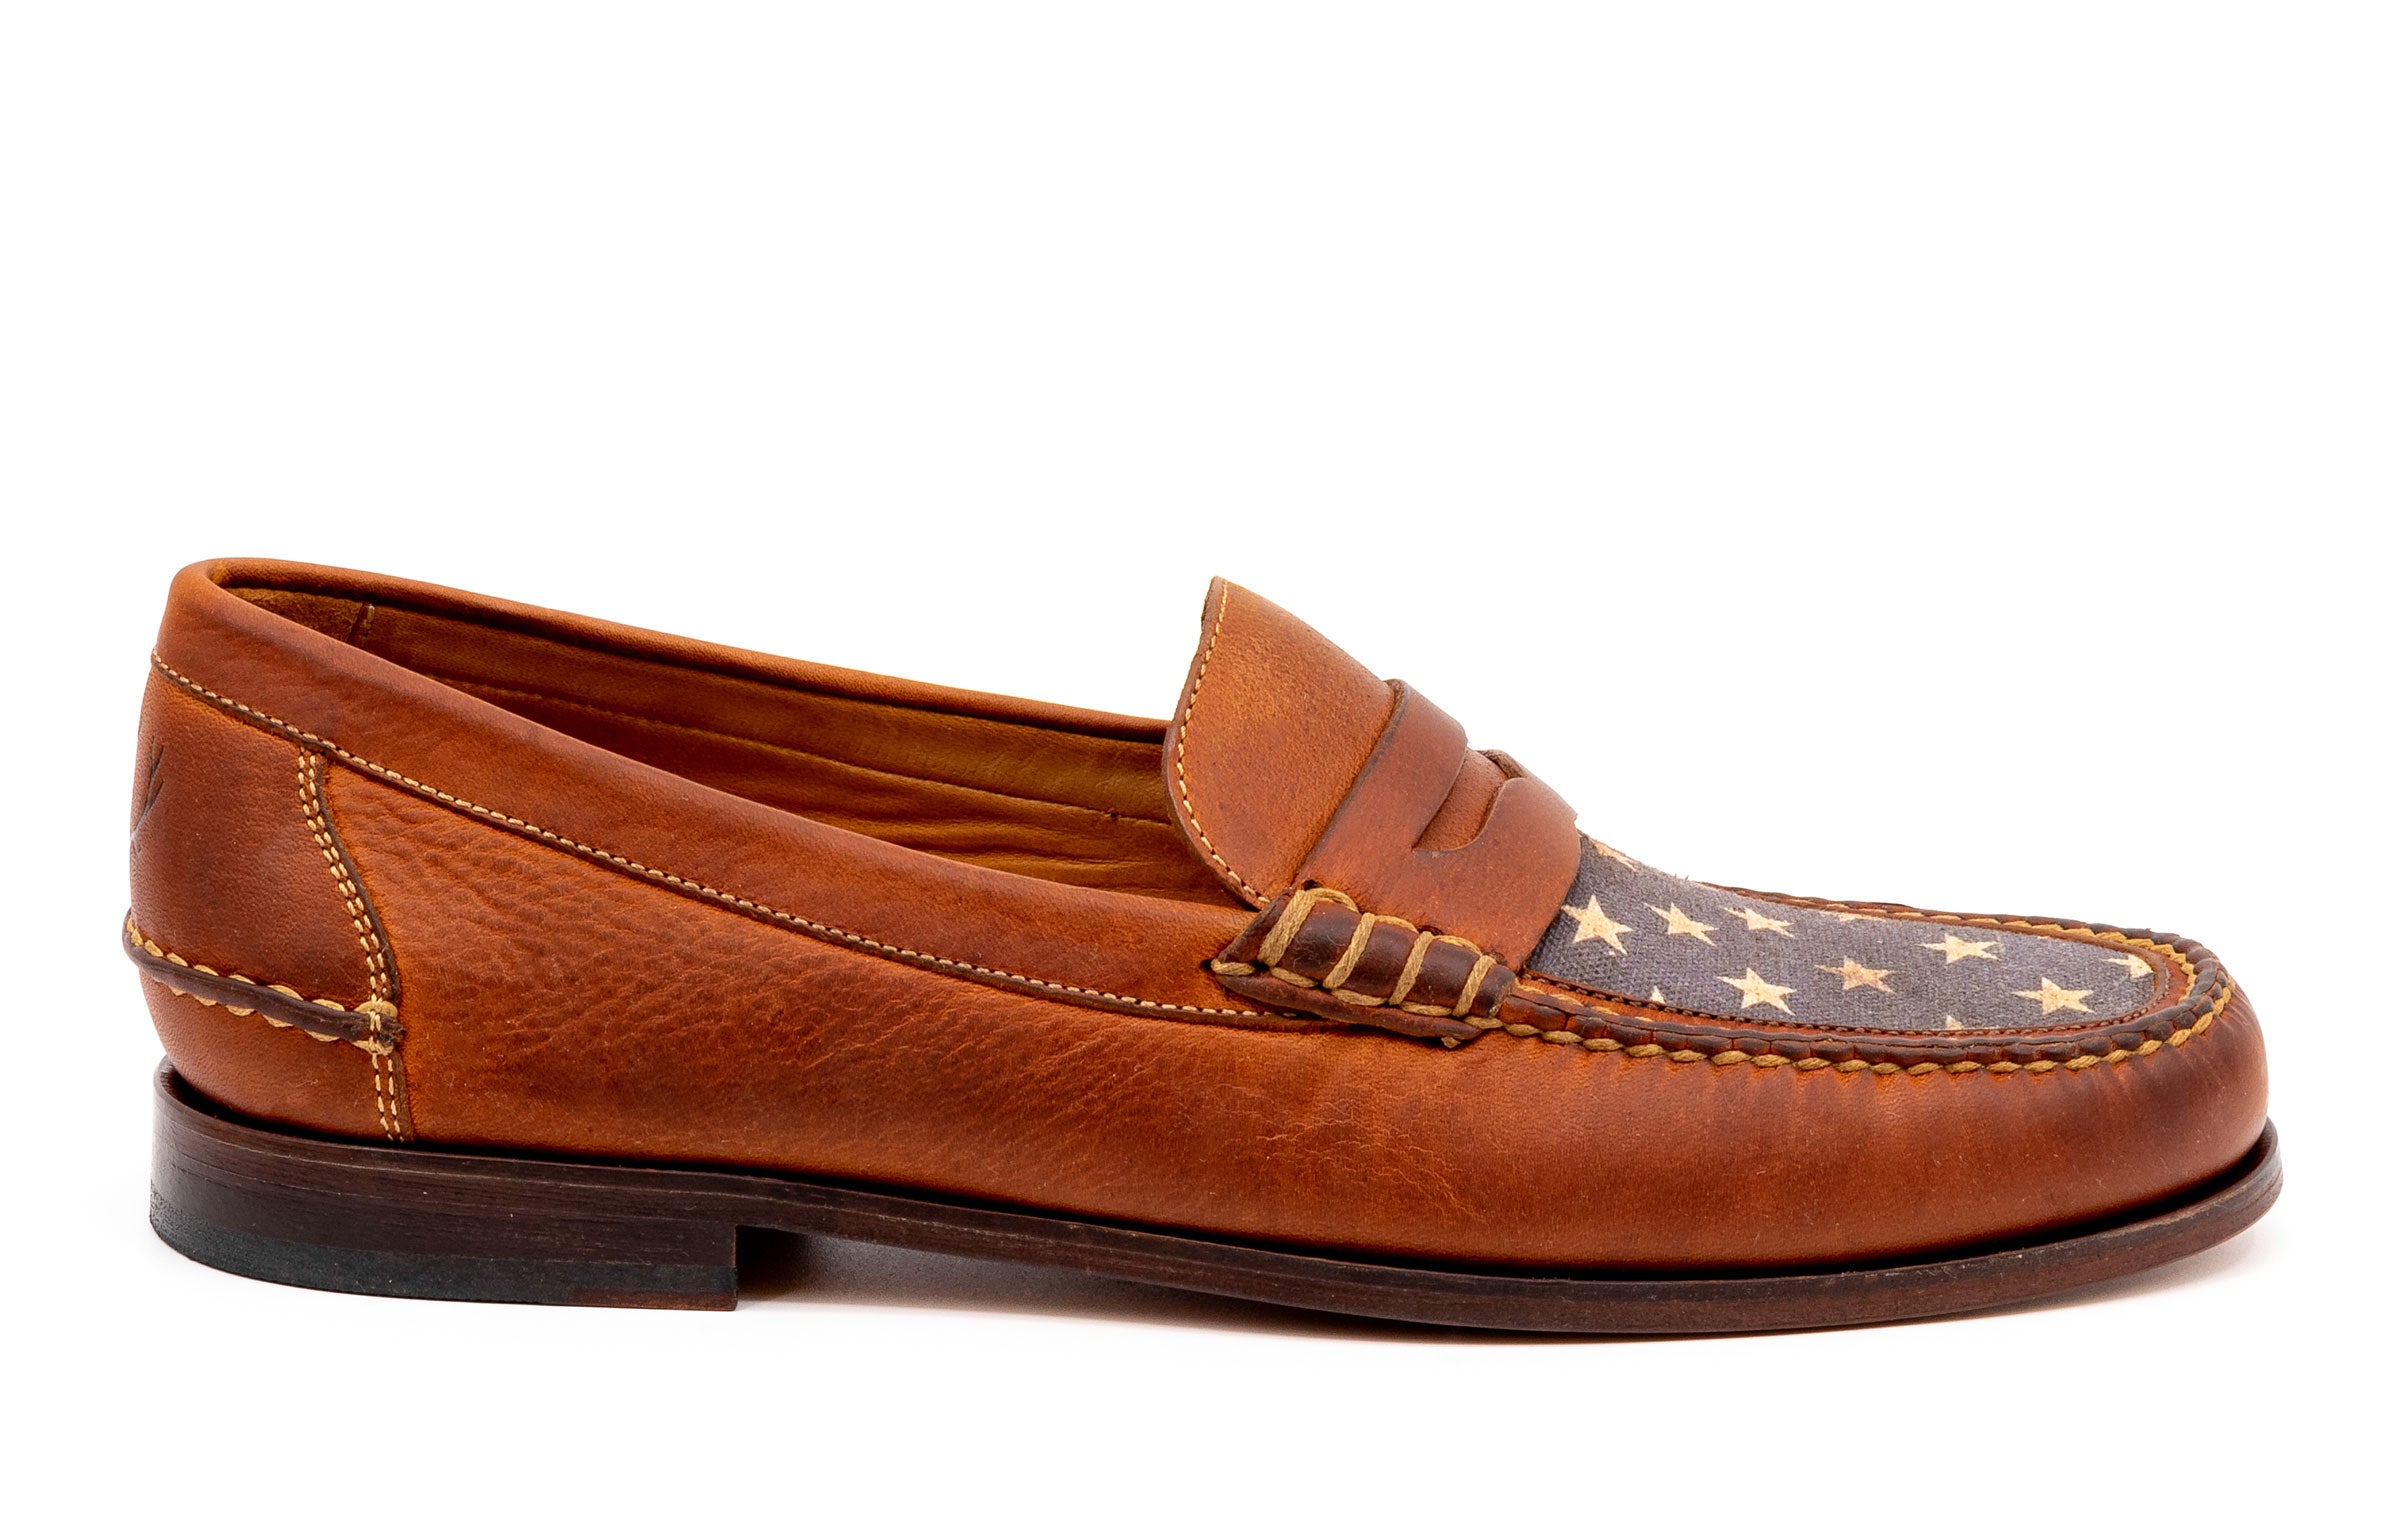 Martin Dingman All American Penny Loafer in Rust /American Flag